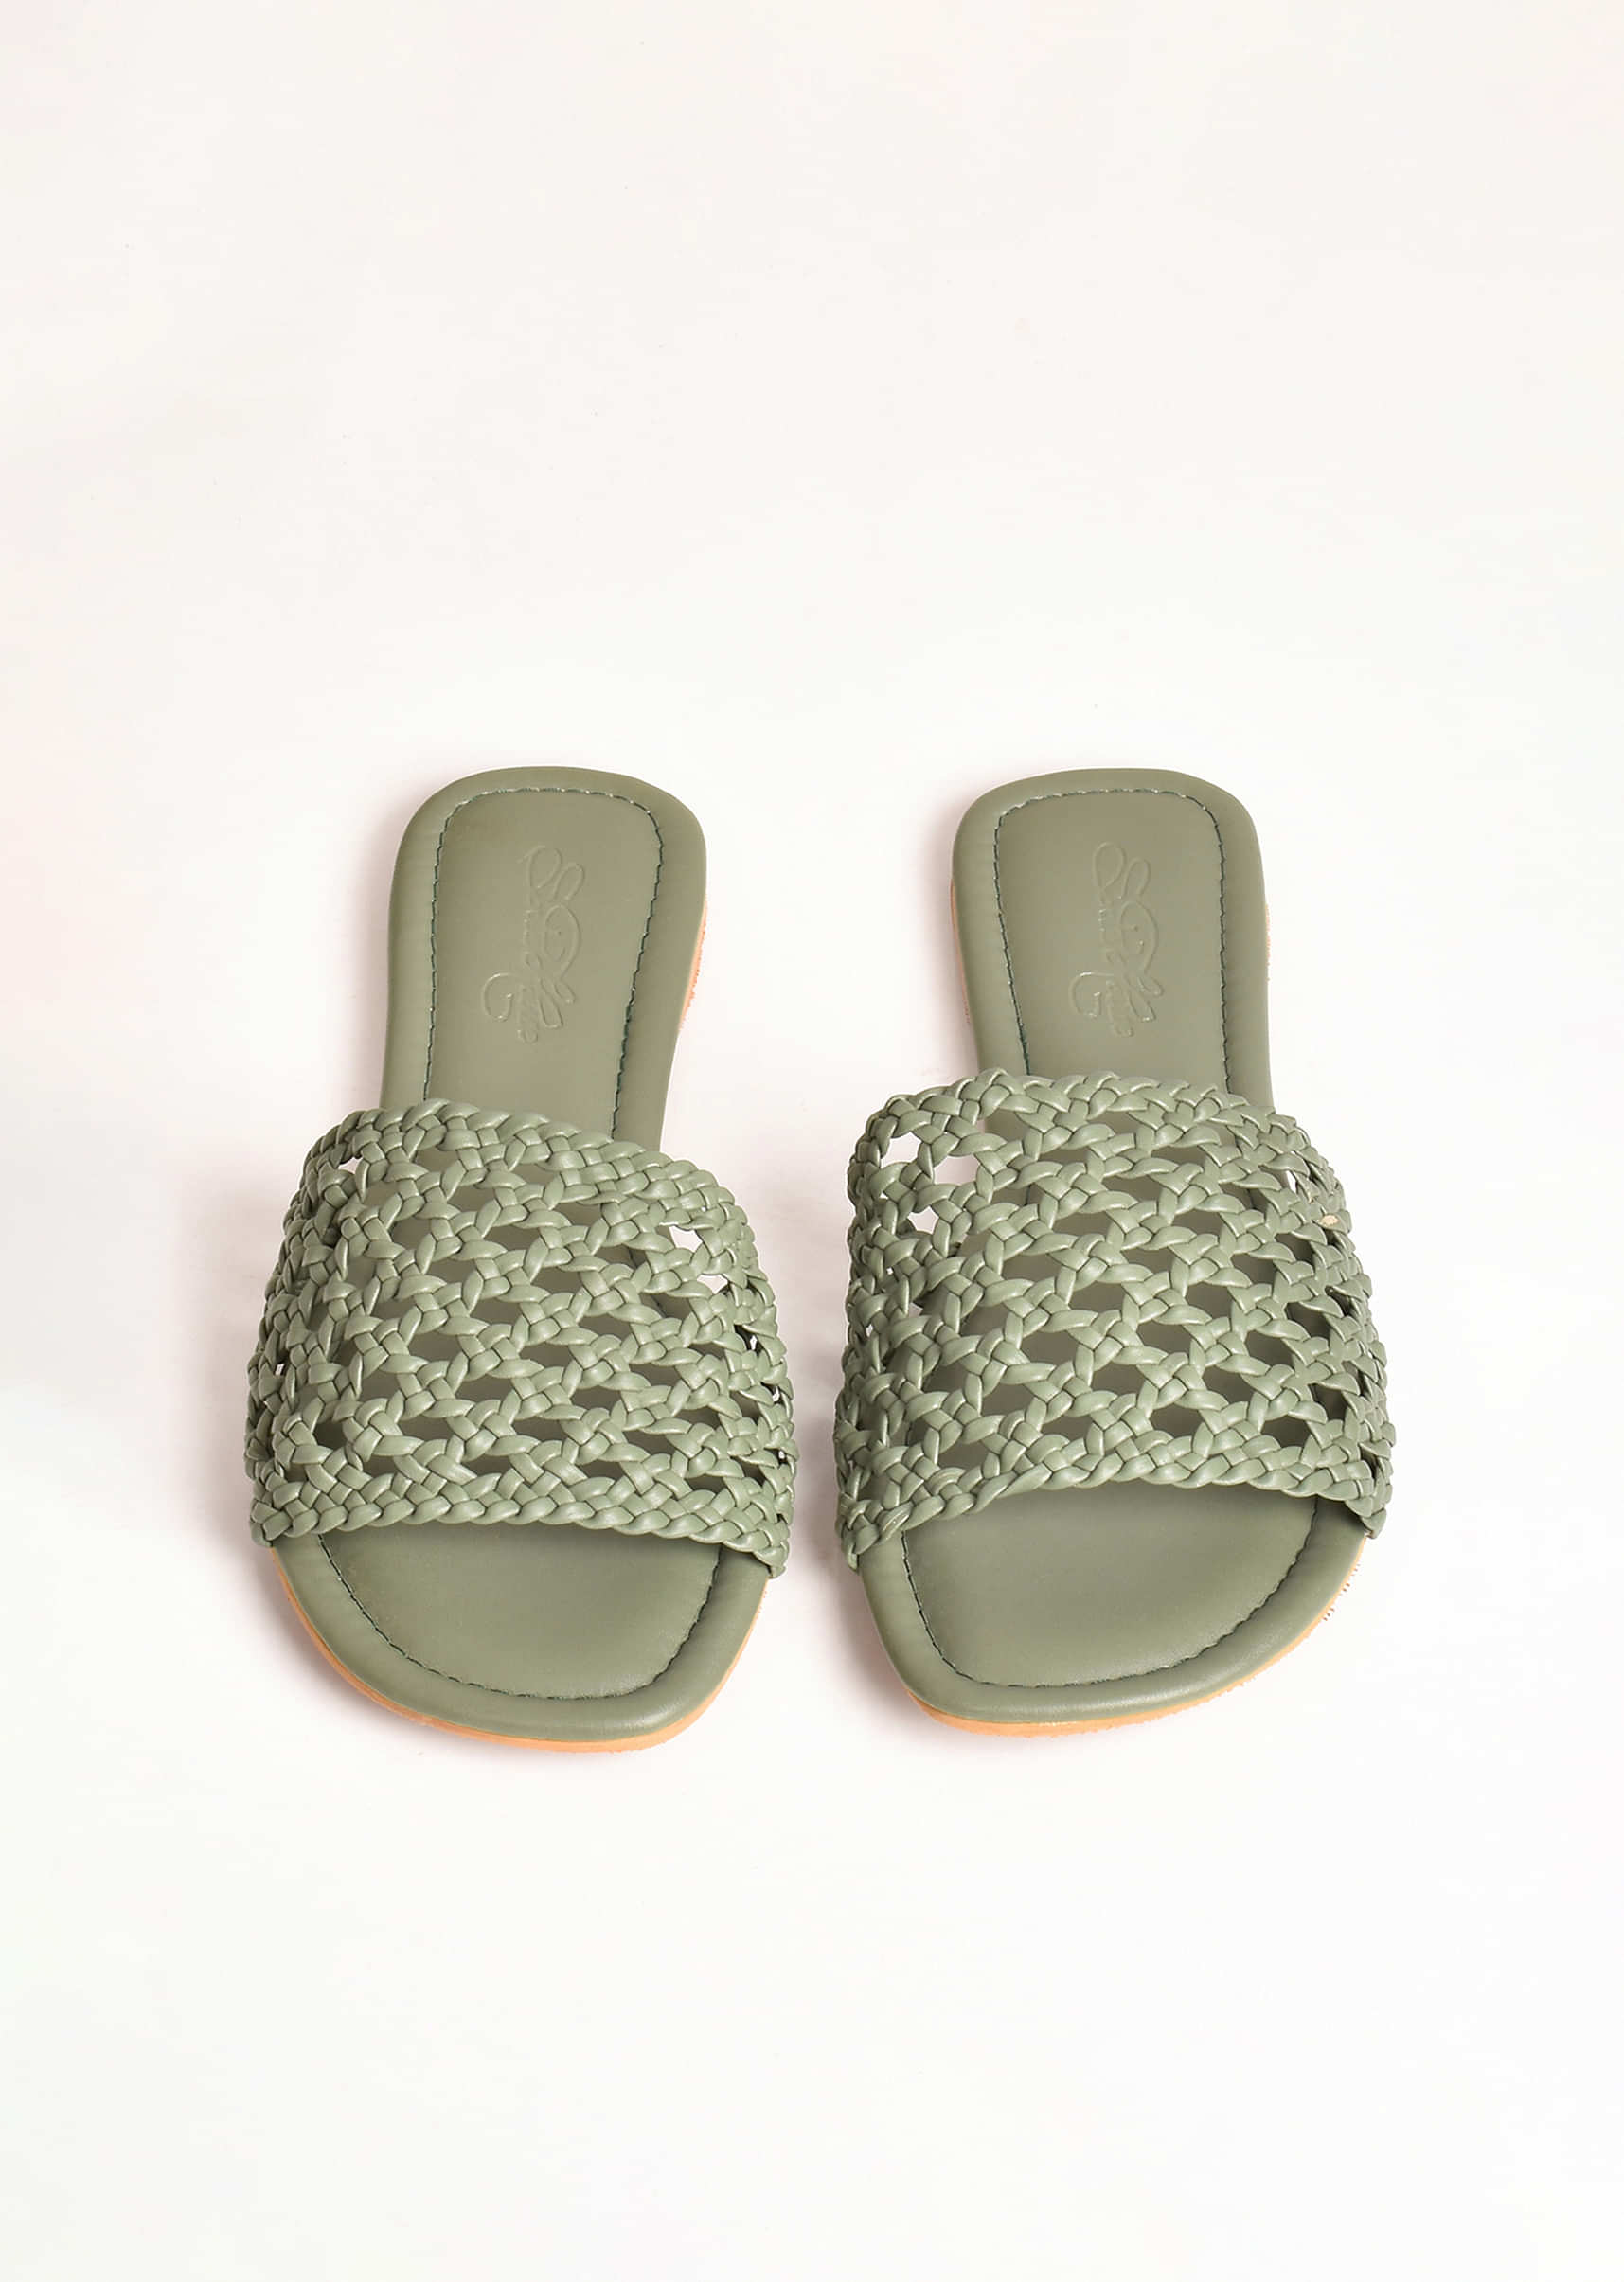 Olive Green Flats With Hand Woven Mesh Design By Sole House